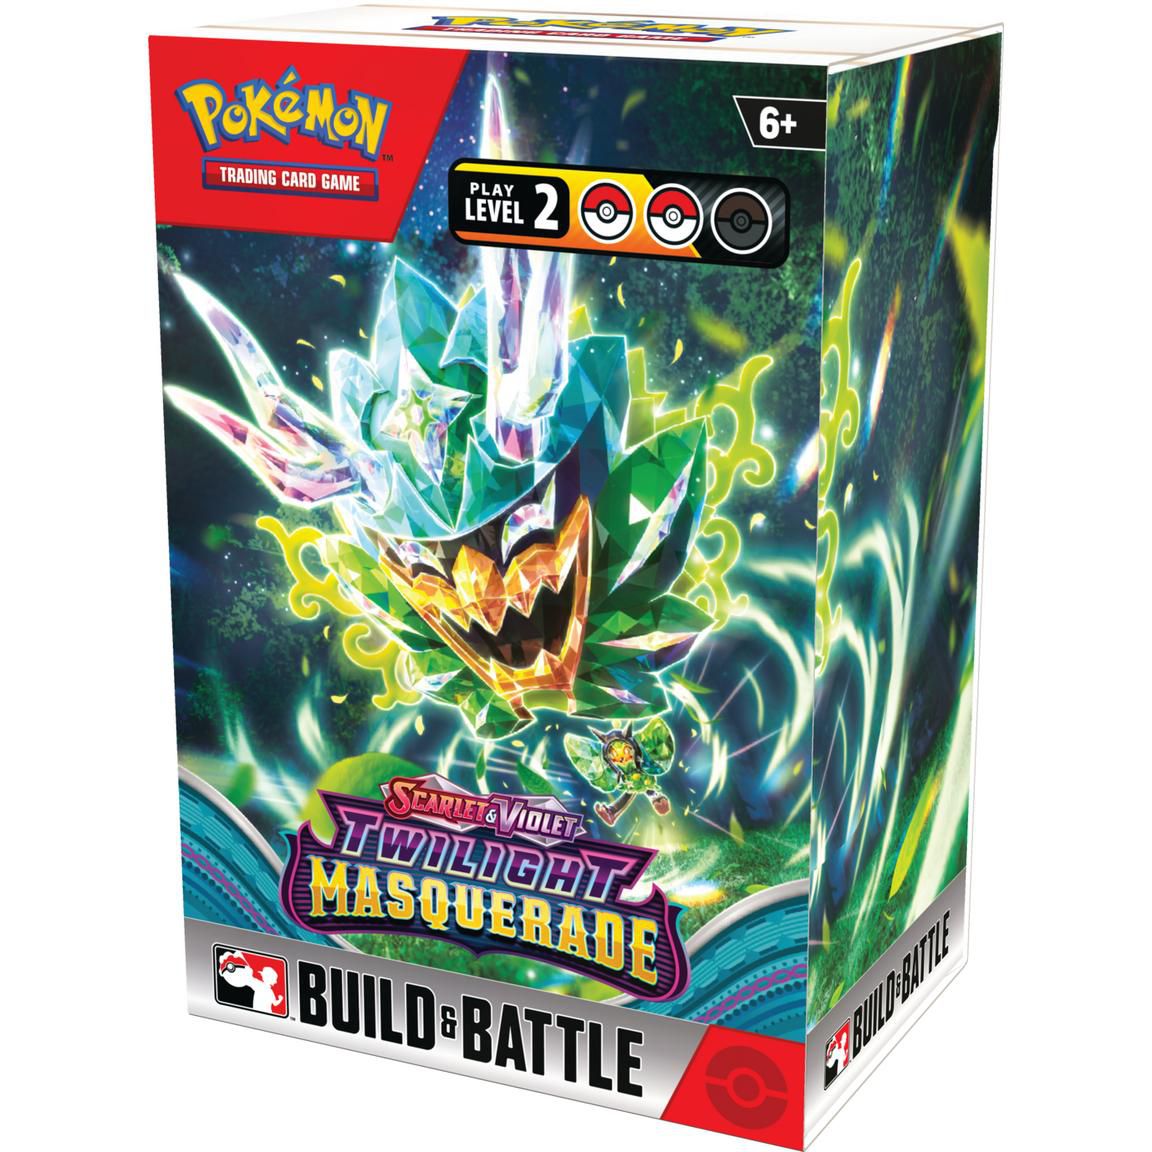 A Build and Battle Pokémon TCG box for Twilight Masquerade, featuring an Ogerpon on the cover.